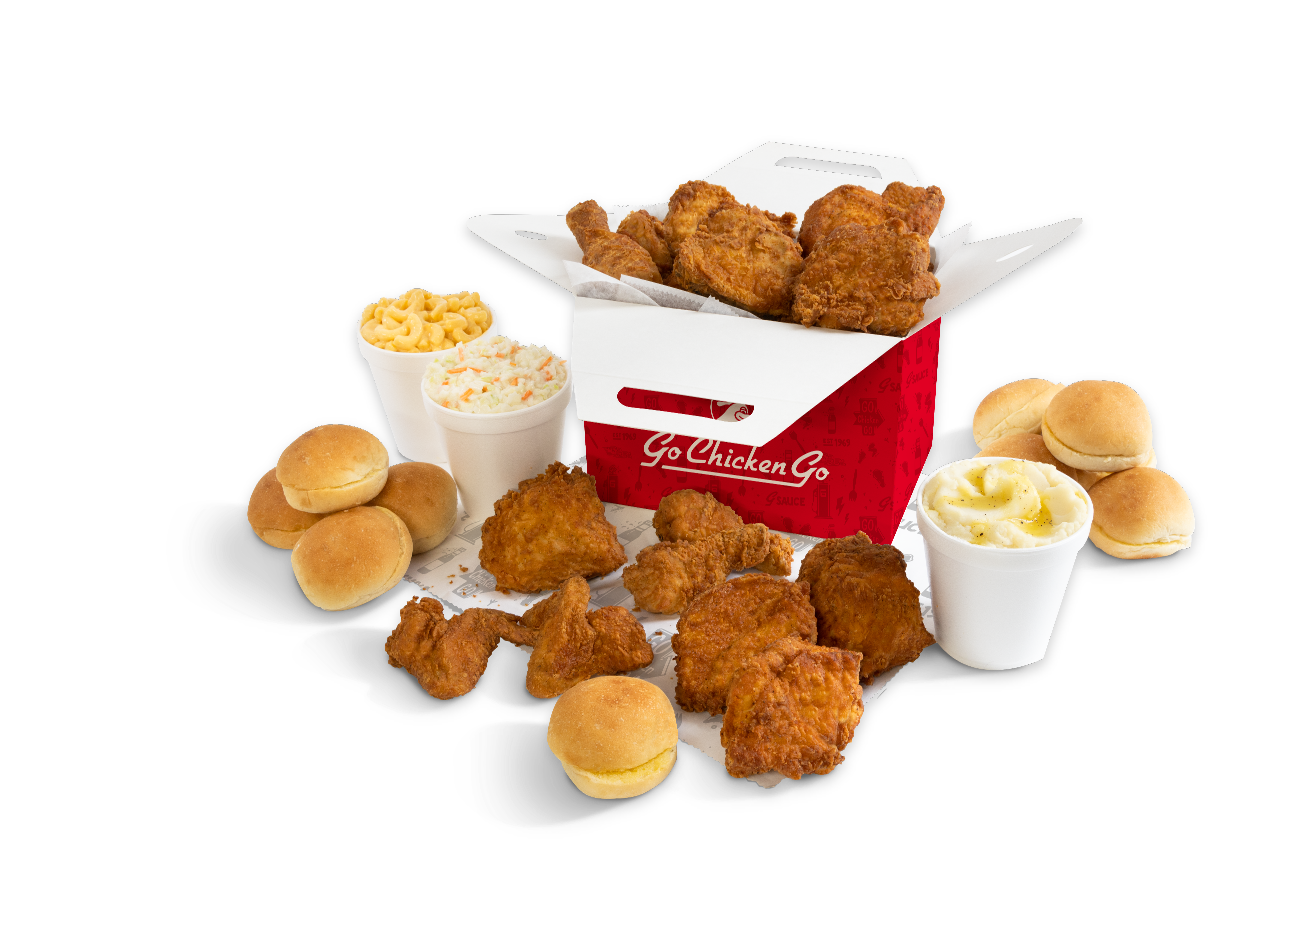 A food tray of golden fried chicken and sides